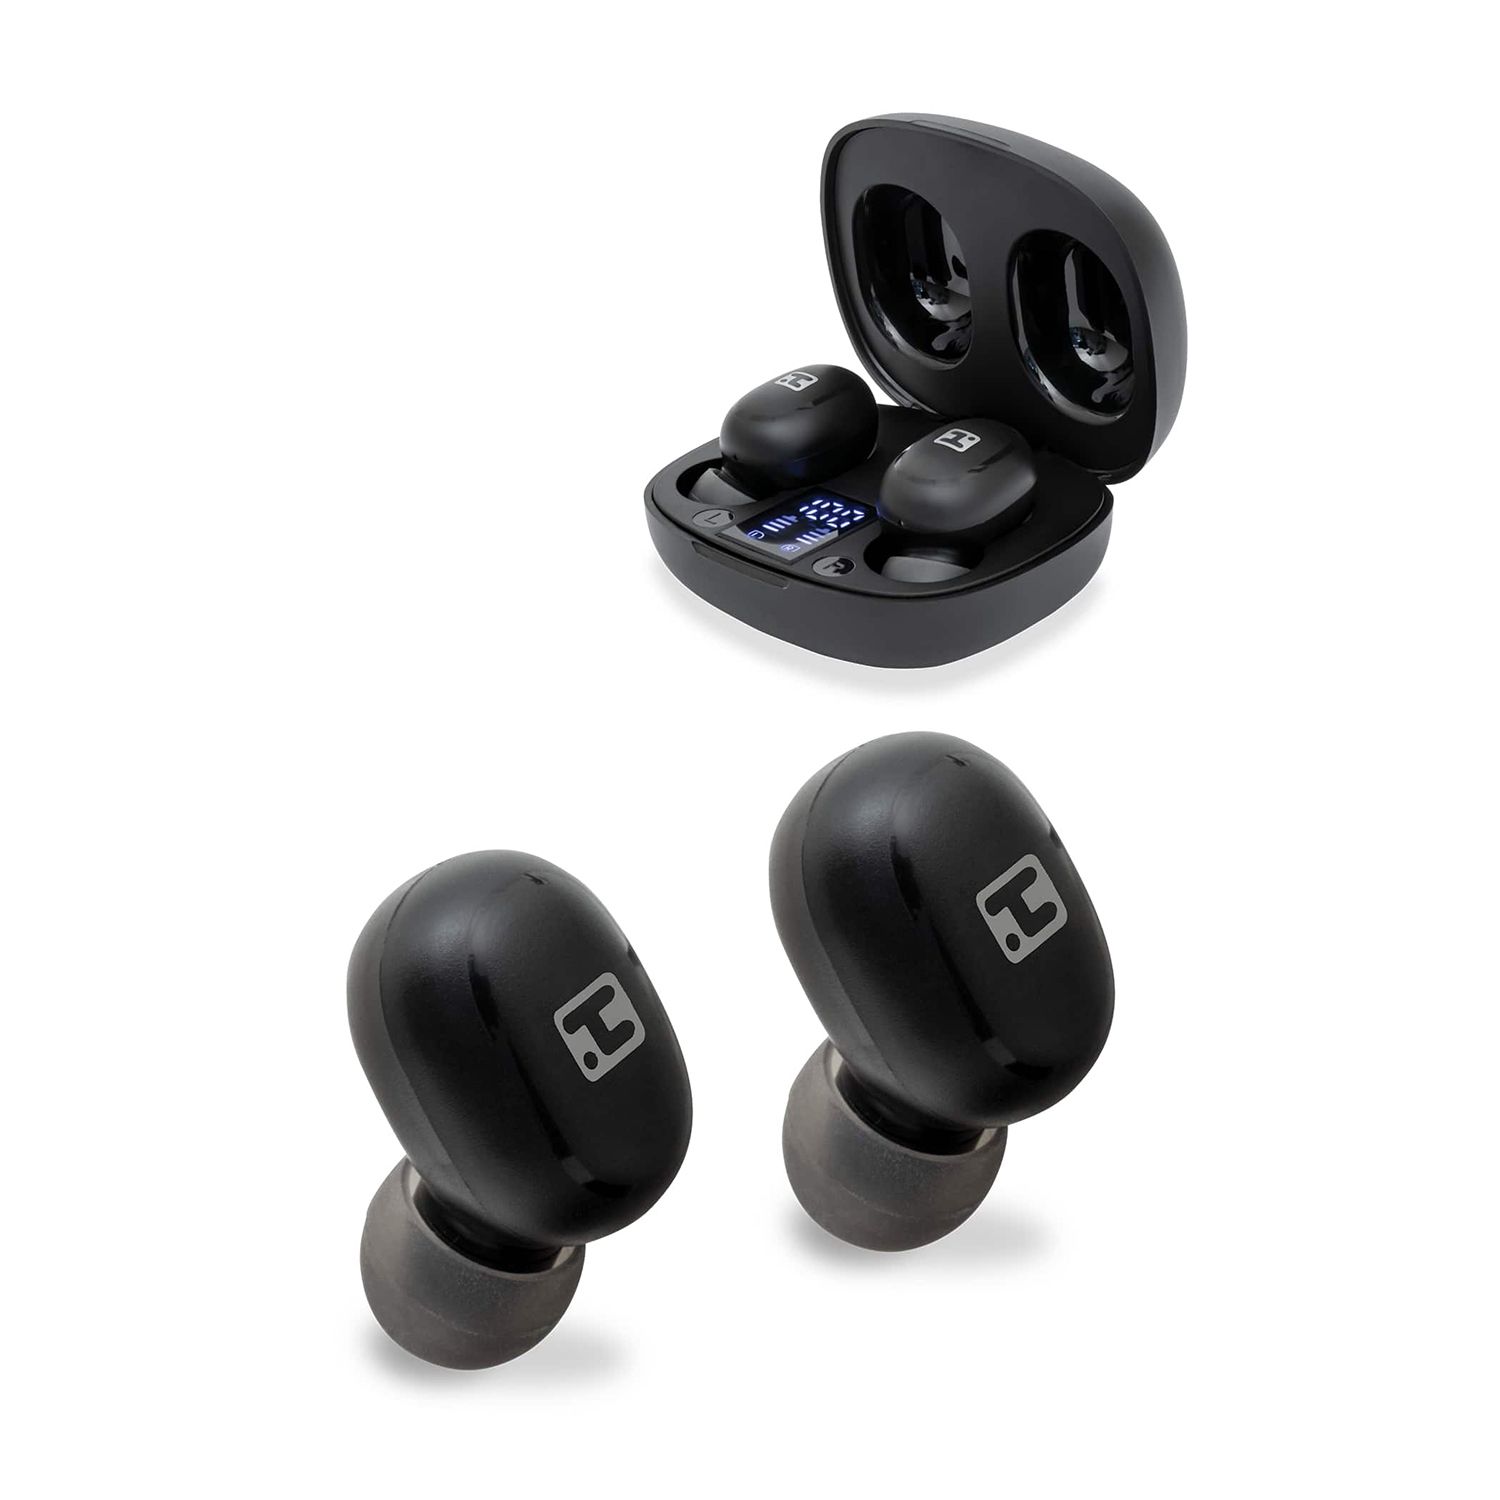 Image for iHome XT-45 True Wireless Earbuds with Charging Case at Kohl's.